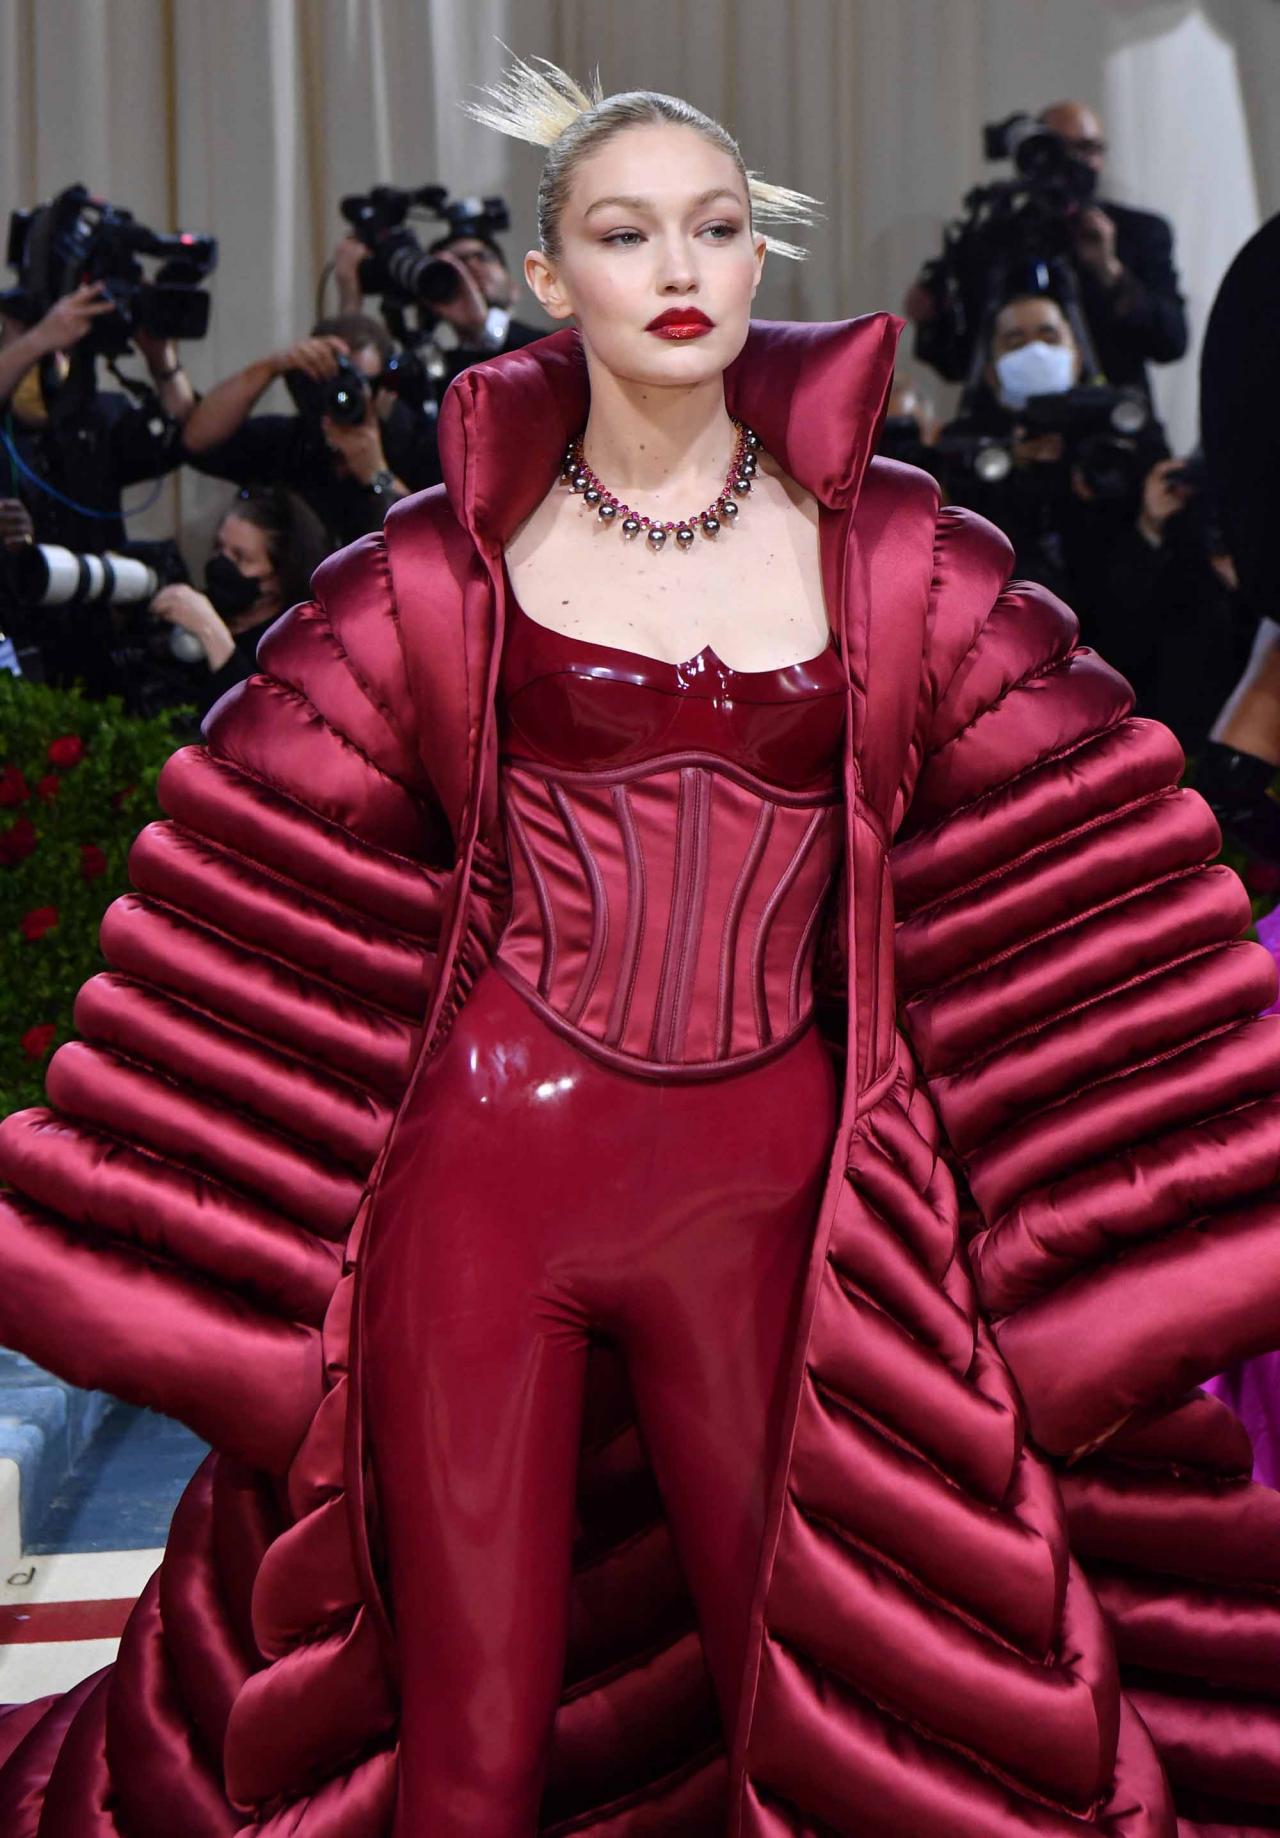 US model Gigi Hadid arrives for the 2022 Met Gala at the Metropolitan Museum of Art on May 2, 2022, in New York. - The Gala raises money for the Metropolitan Museum of Art's Costume Institute. The Gala's 2022 theme is "In America: An Anthology of Fashion". (Photo by ANGELA  WEISS / AFP)